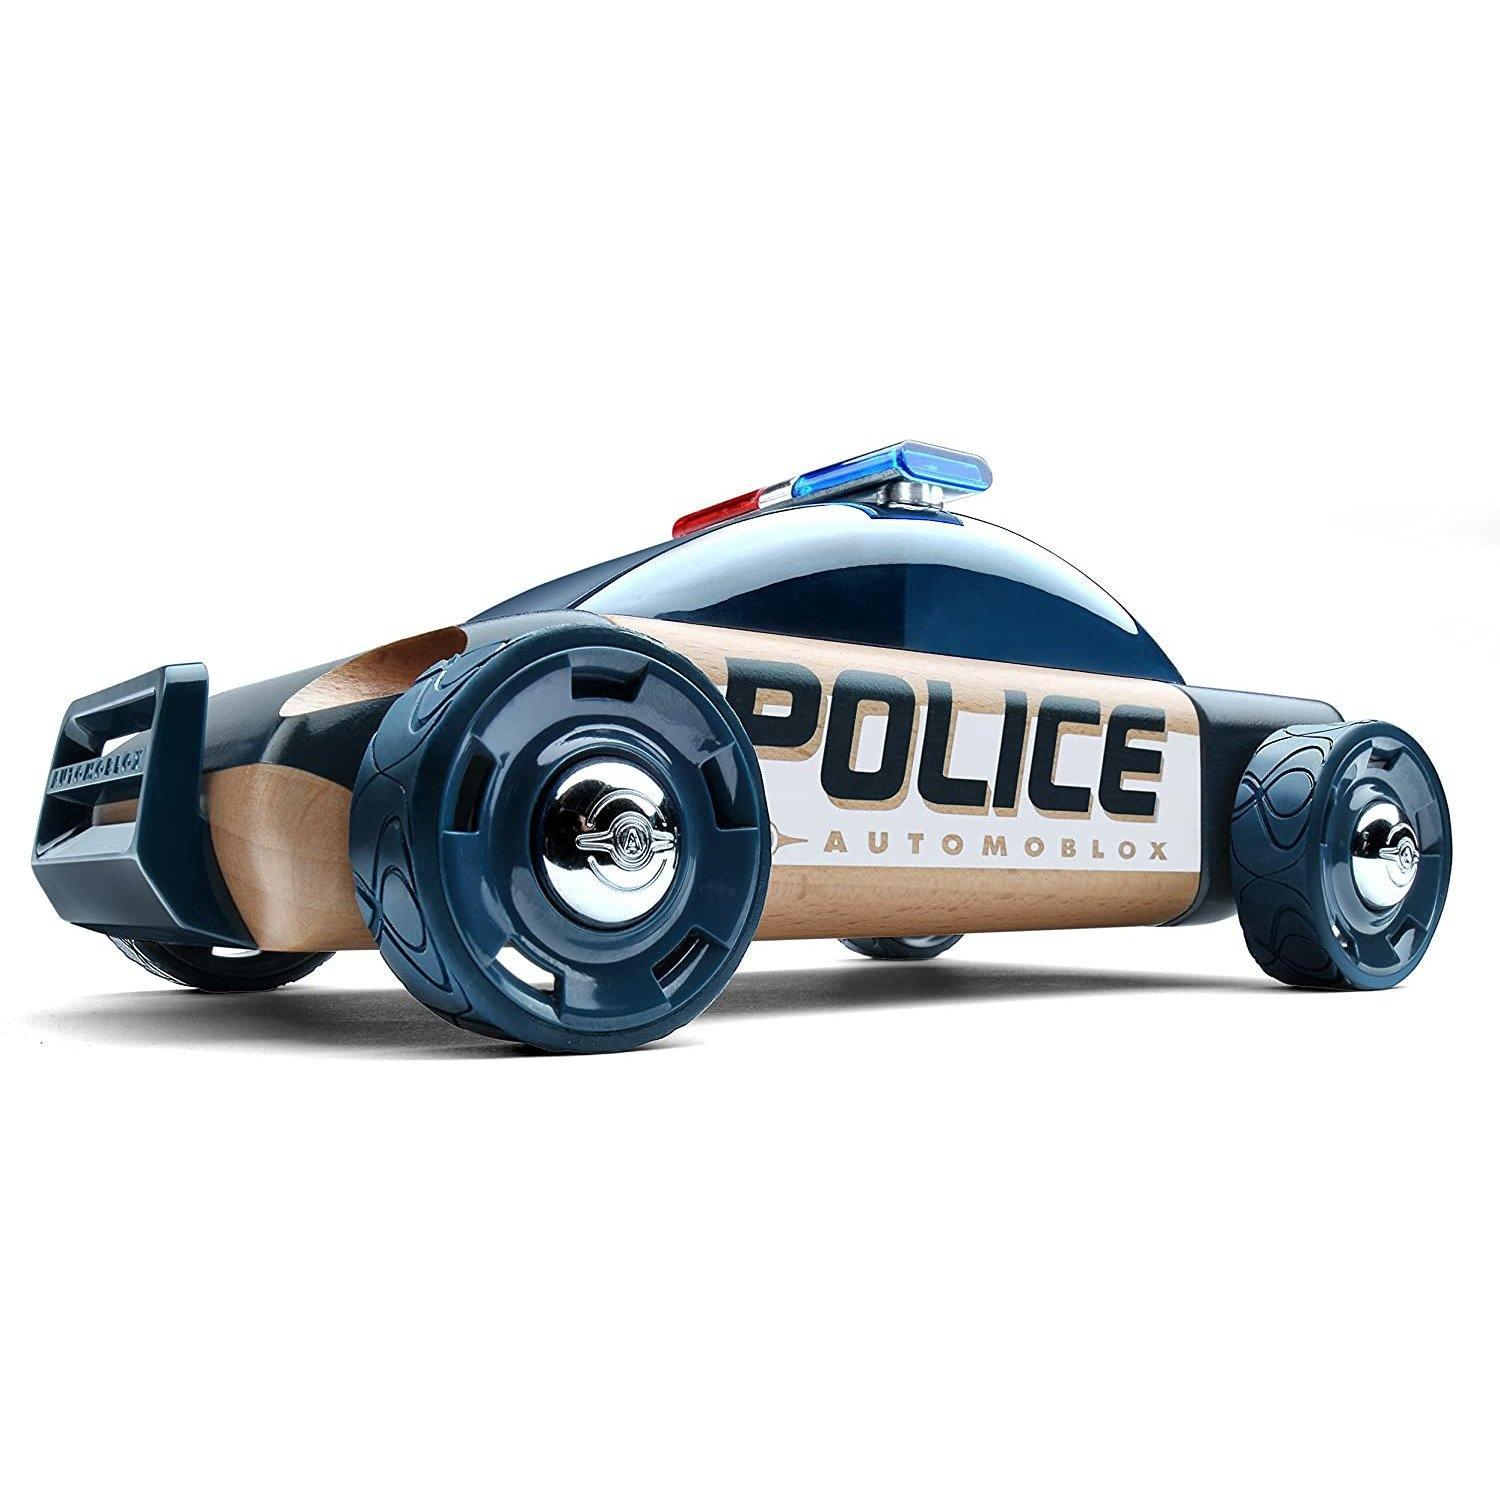 S9 Police Cruiser/ X9 Fire SUV/ T900 Rescue Truck 3 Pack Automoblox Minis - BumbleToys - 5-7 Years, Boys, OXE, Vehicles & Play Sets